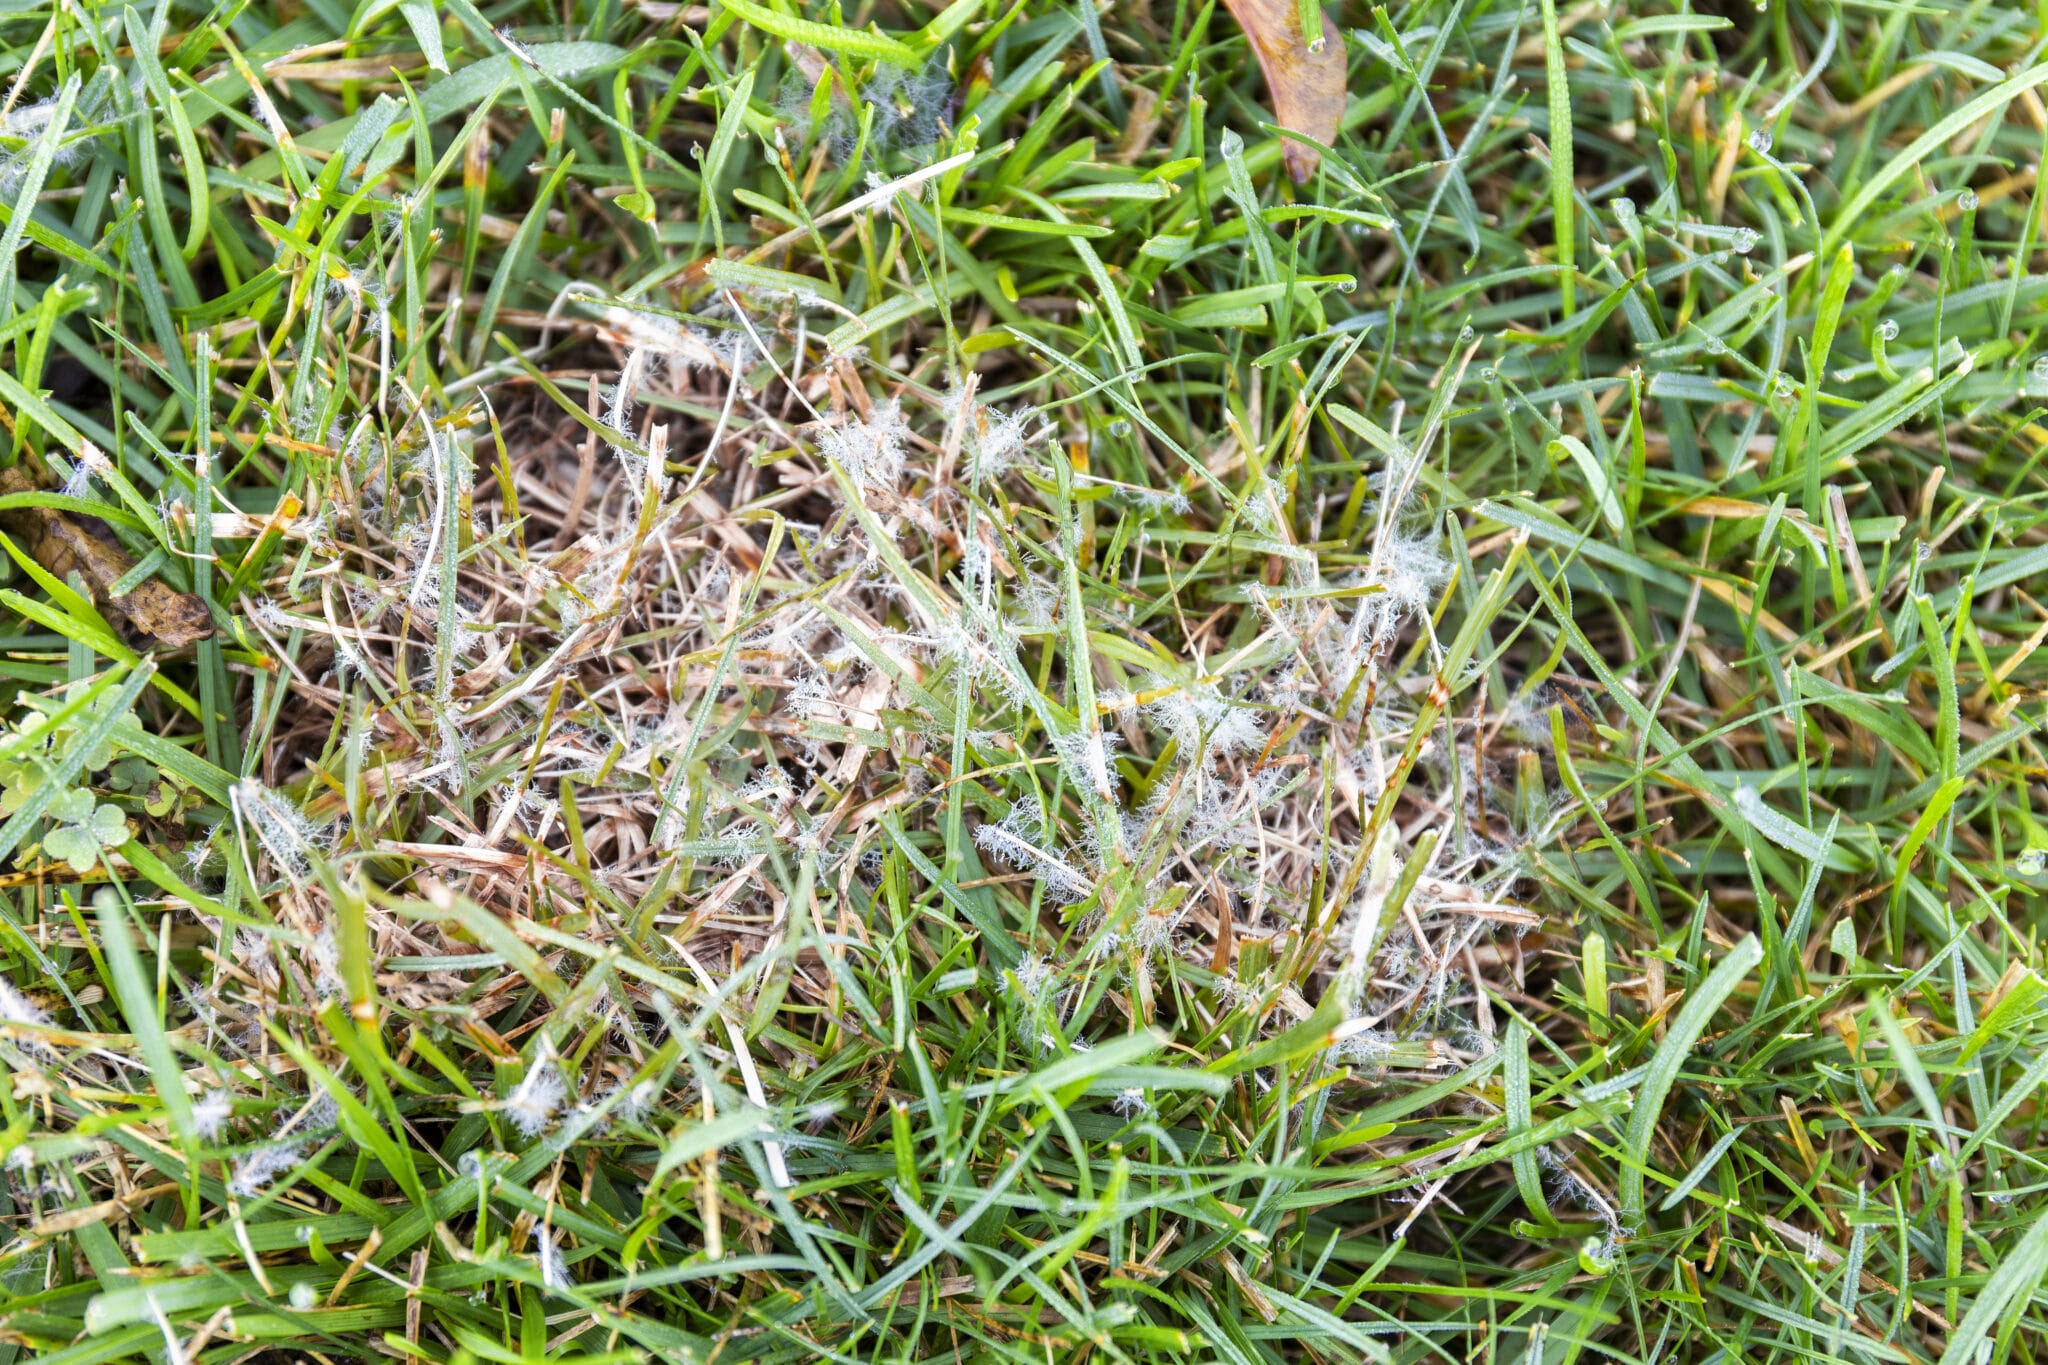 Common Fall Lawn Diseases | Cardinal Lawns